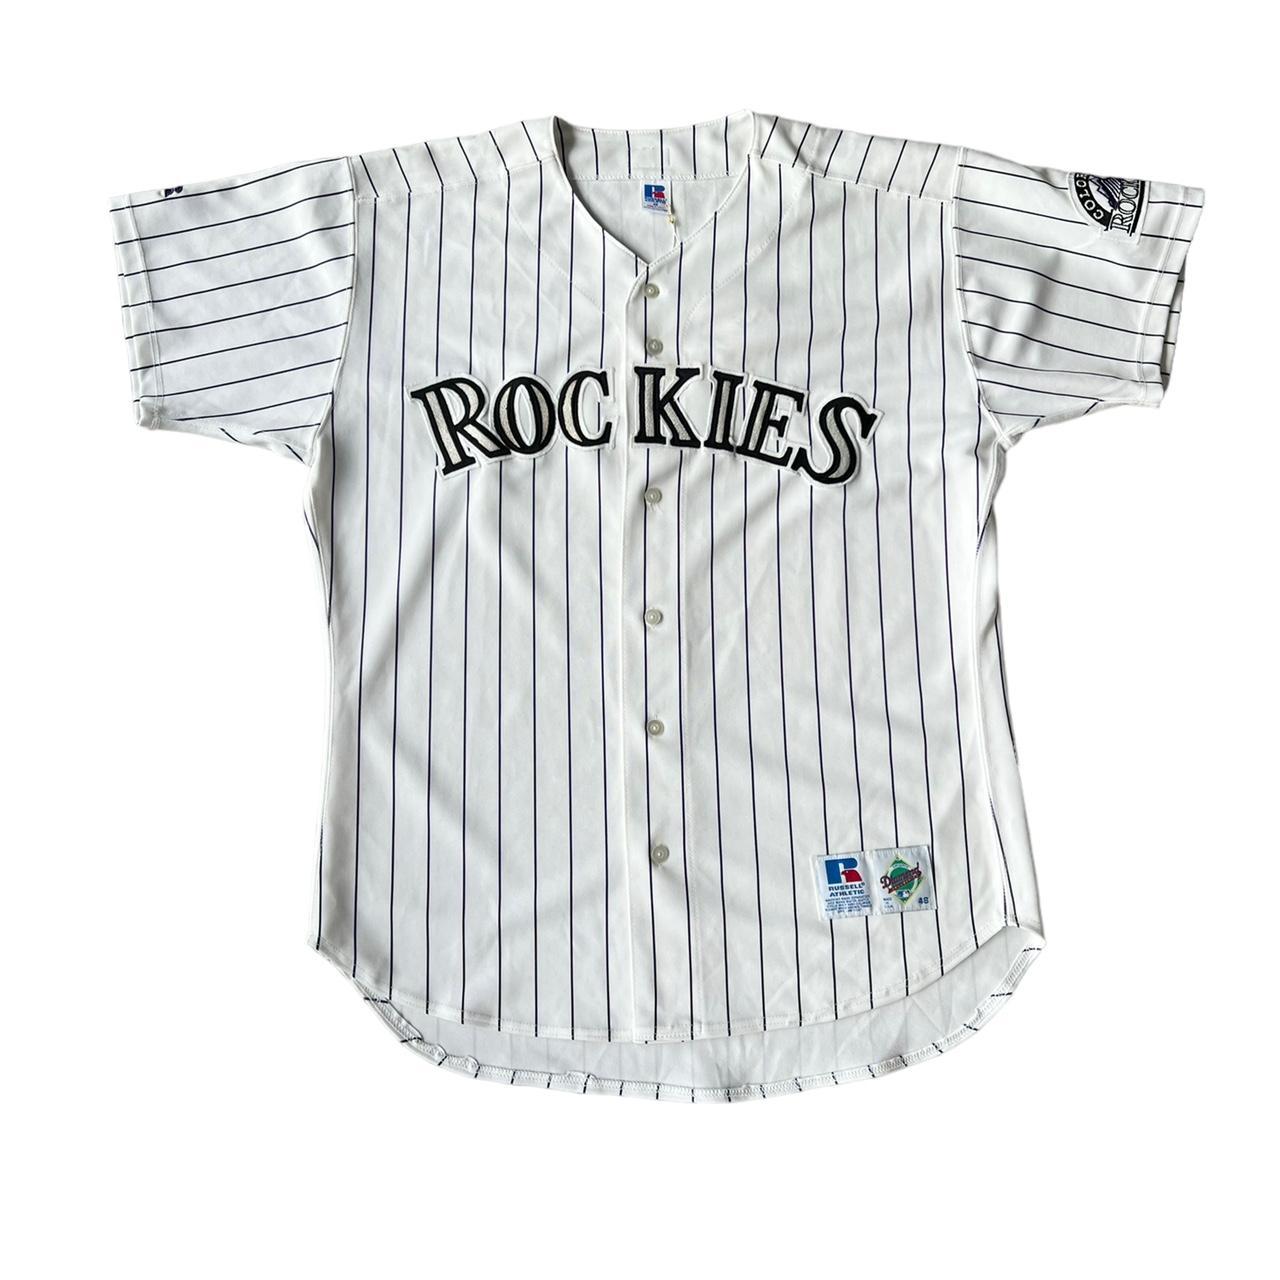 90's vintage colorado rockies authentic Russell jersey